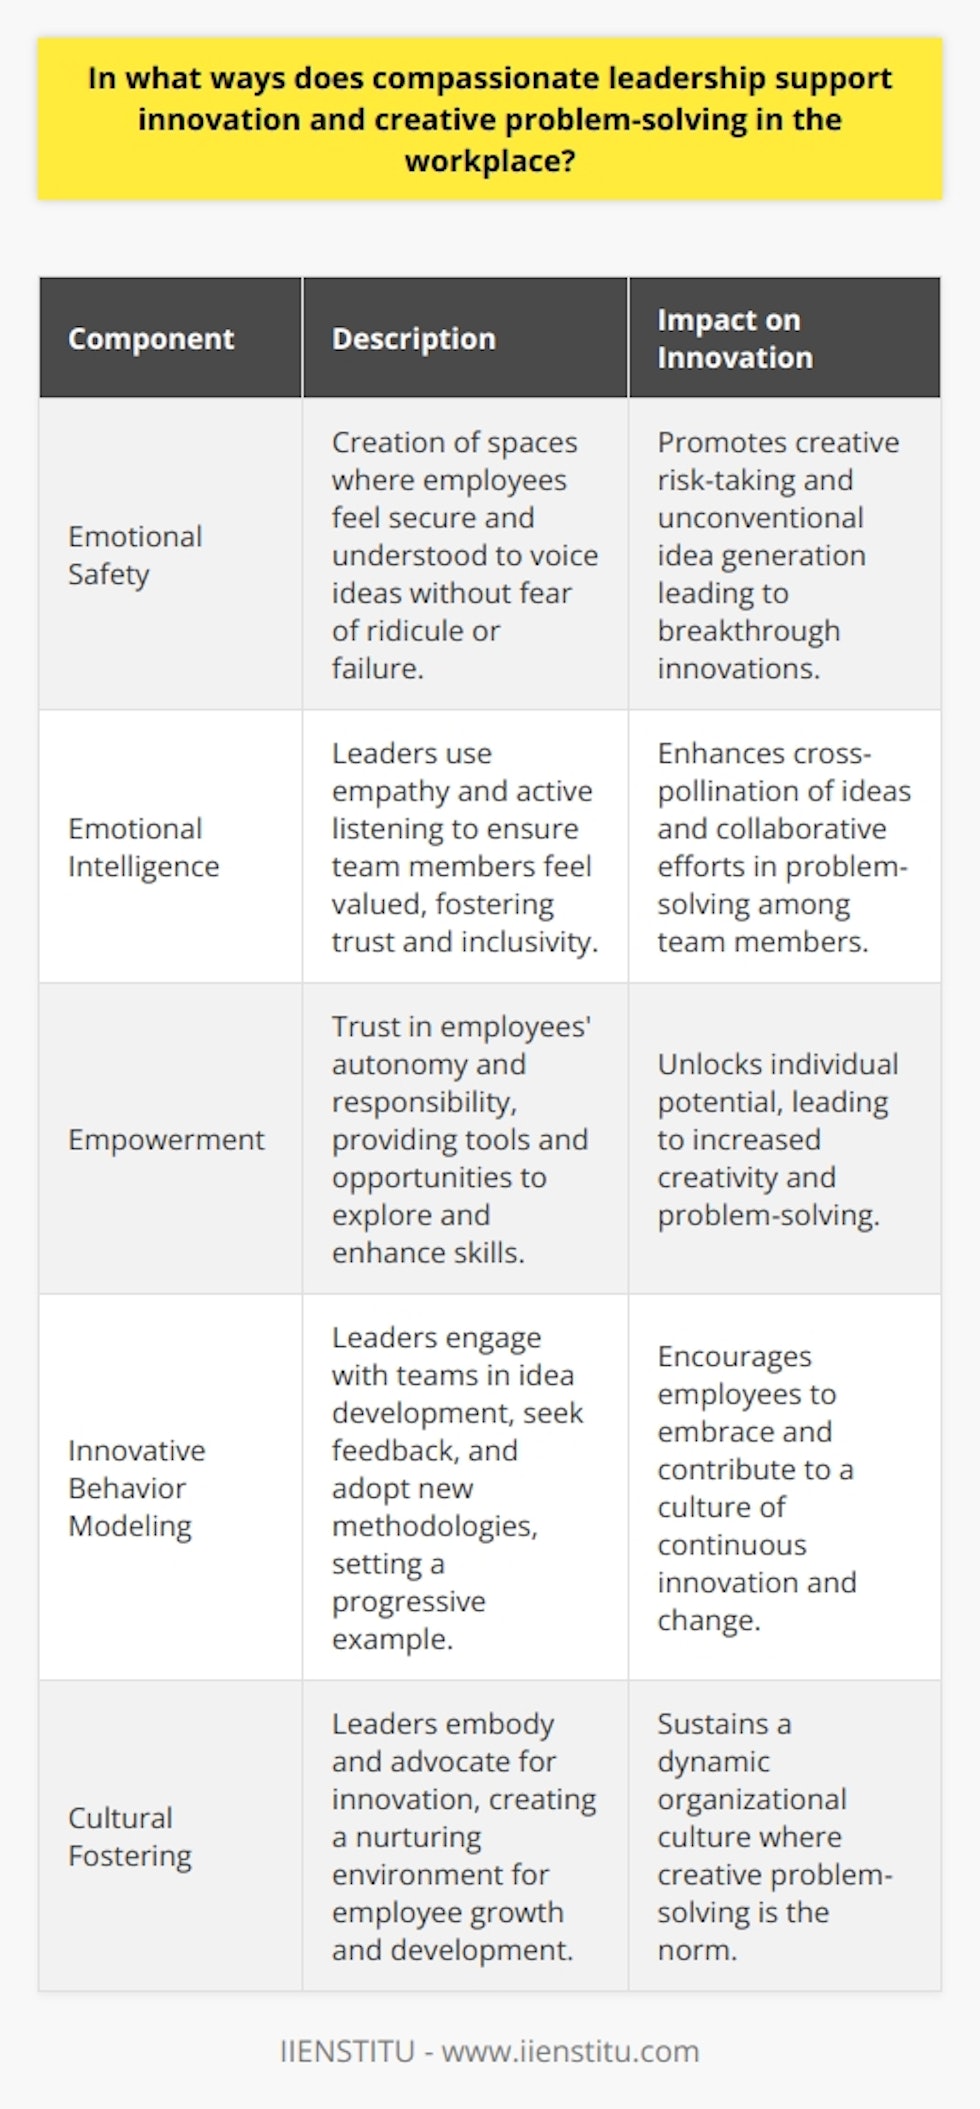 Compassionate leadership plays a pivotal role in fostering innovation and facilitating creative problem-solving within modern organizations. It lies at the intersection of empathy, emotional intelligence, and the drive for continuous improvement. By integrating these elements, leaders can create a culture where innovation thrives.Emotional Safe Spaces and Creative Risk-TakingOne of the hallmarks of compassionate leadership is the cultivation of a workplace grounded in psychological safety. When team members feel secure and understood, they are more inclined to partake in creative risk-taking without the fear of ridicule or failure. Compassionate leaders build such a nurturing environment by consistently encouraging open dialogue and validating their employees’ contributions. This support emboldens individuals to propose unconventional ideas and solutions, which can lead to breakthrough innovations.Enhanced Collaboration through Emotional IntelligenceCompassionate leaders typically wield a high degree of emotional intelligence, which allows them to navigate the complex dynamics of interpersonal relationships within the workplace. By actively listening, empathizing, and responding to the emotions of their team, leaders ensure that every member feels valued and heard. This form of inclusivity not only builds trust but also encourages the cross-pollination of ideas among team members, thus enhancing collaborative efforts toward problem-solving.Empowerment as a Catalyst for GrowthIn the realm of compassionate leadership, empowerment is another crucial element for fostering innovation. Leaders who empower trust their employees with autonomy and responsibility, prompting a sense of ownership over their work. By providing the right tools, opportunities for skill enhancement, and the freedom to explore, compassionate leaders unlock the potential within their teams, allowing creativity and problem-solving abilities to blossom. IIENSTITU, for example, focuses on nurturing the talents of its learners by offering educational programs that empower professionals to expand their competencies and thus innovate within their respective fields.Modeling Innovative BehaviorThe impact of leading by example cannot be overstated. Compassionate leaders are champions of innovation, not only in rhetoric but also through their actions. By engaging with their teams in brainstorming sessions, actively seeking feedback, and being open to adopting new methodologies, these leaders demonstrate an unwavering commitment to progress and change. This behavior sets a standard in the workplace, inspiring employees to mirror this openness to innovation in their day-to-day roles.Overall, compassionate leadership paves the way for a fertile ground upon which innovation can grow and flourish. When team members are valued and their development fostered, when collaboration is prioritized, and when leaders themselves embody the innovation they seek, creative problem-solving becomes ingrained in the company's culture. This synergy not only leads to successful innovation outcomes but also sustains a dynamic and continually evolving organization.